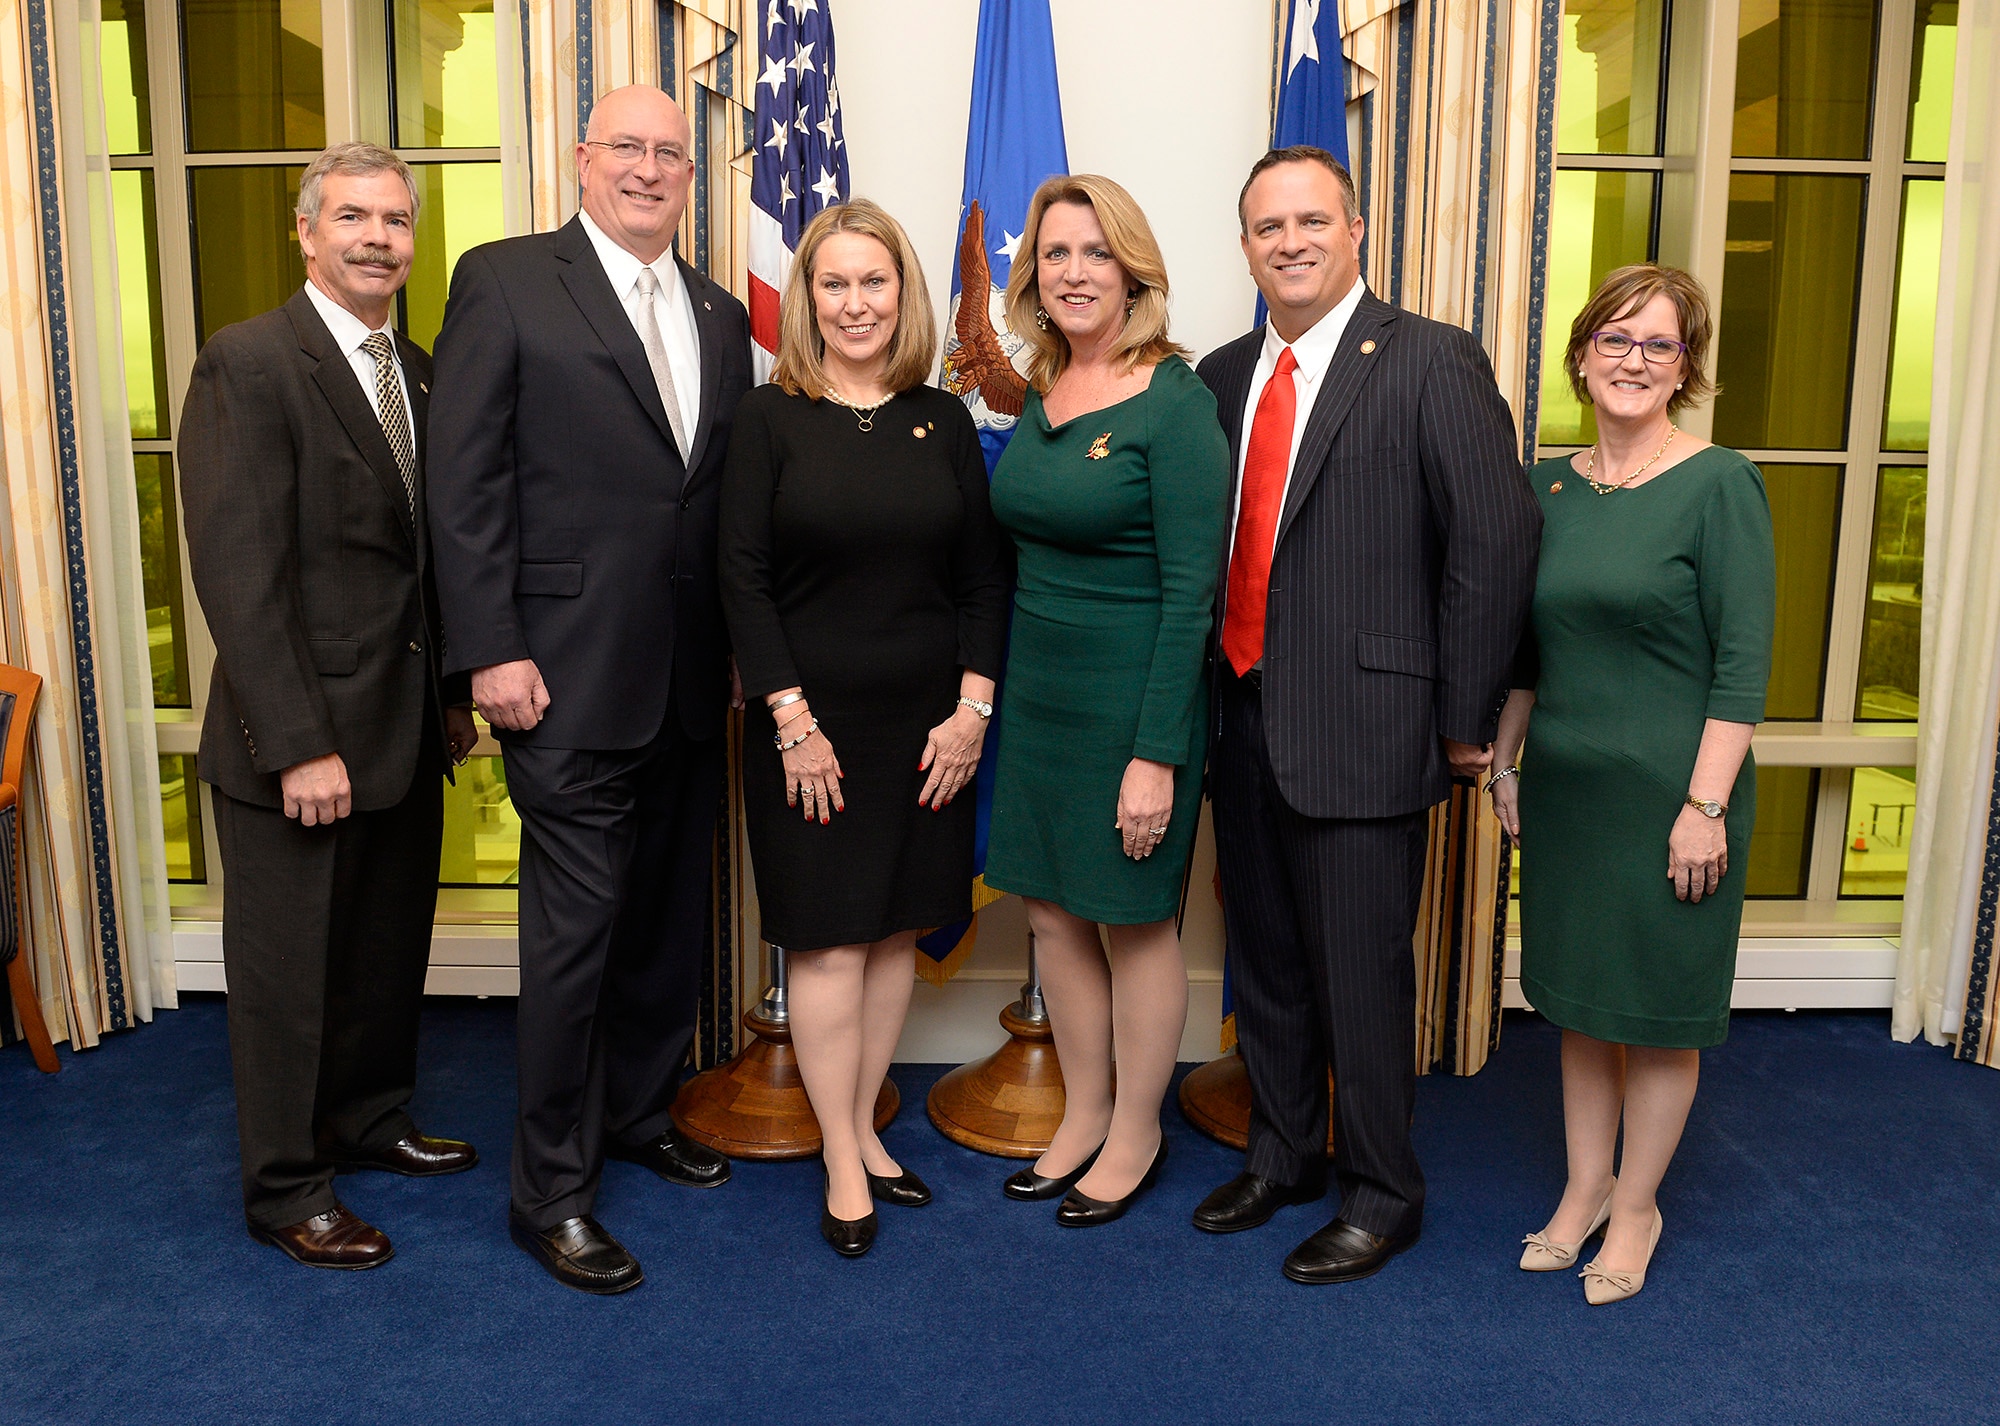 Secretary of the Air Force Deborah Lee James stands with, from left, John Wood, chairman of the TAPS board; David Coker, president of the Fisher House Foundation; Bonnie Carroll, founder of TAPS; Brian Gawe, vice president for Fisher House community relations; and TAPS member Ellen Andrews. (U.S. Air Force photo/Scott M. Ash)